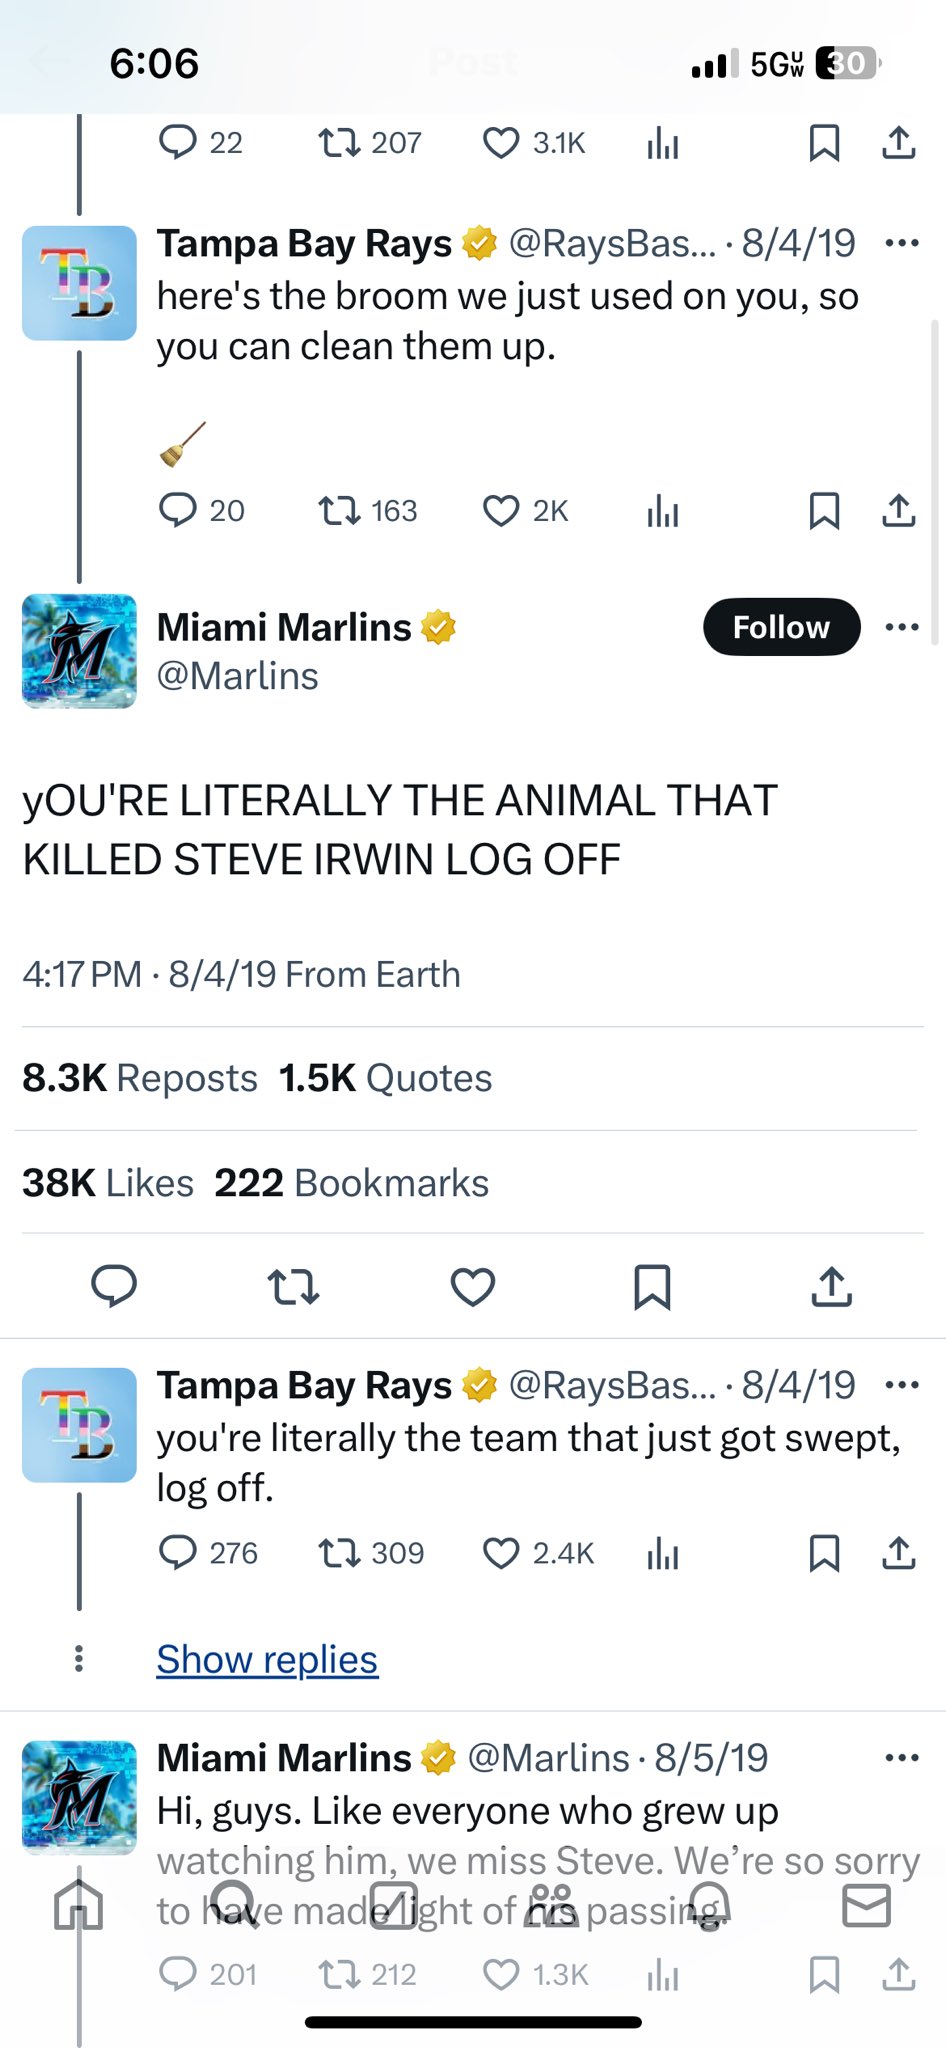 screenshot - Post 5G 30 22 17 207 1 Tampa Bay Rays ... 8419 There's the broom we just used on you, so you can clean them up. M 20 Jl. 1 Miami Marlins You'Re Literally The Animal That Killed Steve Irwin Log Off 8419 From Earth Reposts Quotes 38K 222 Bookma